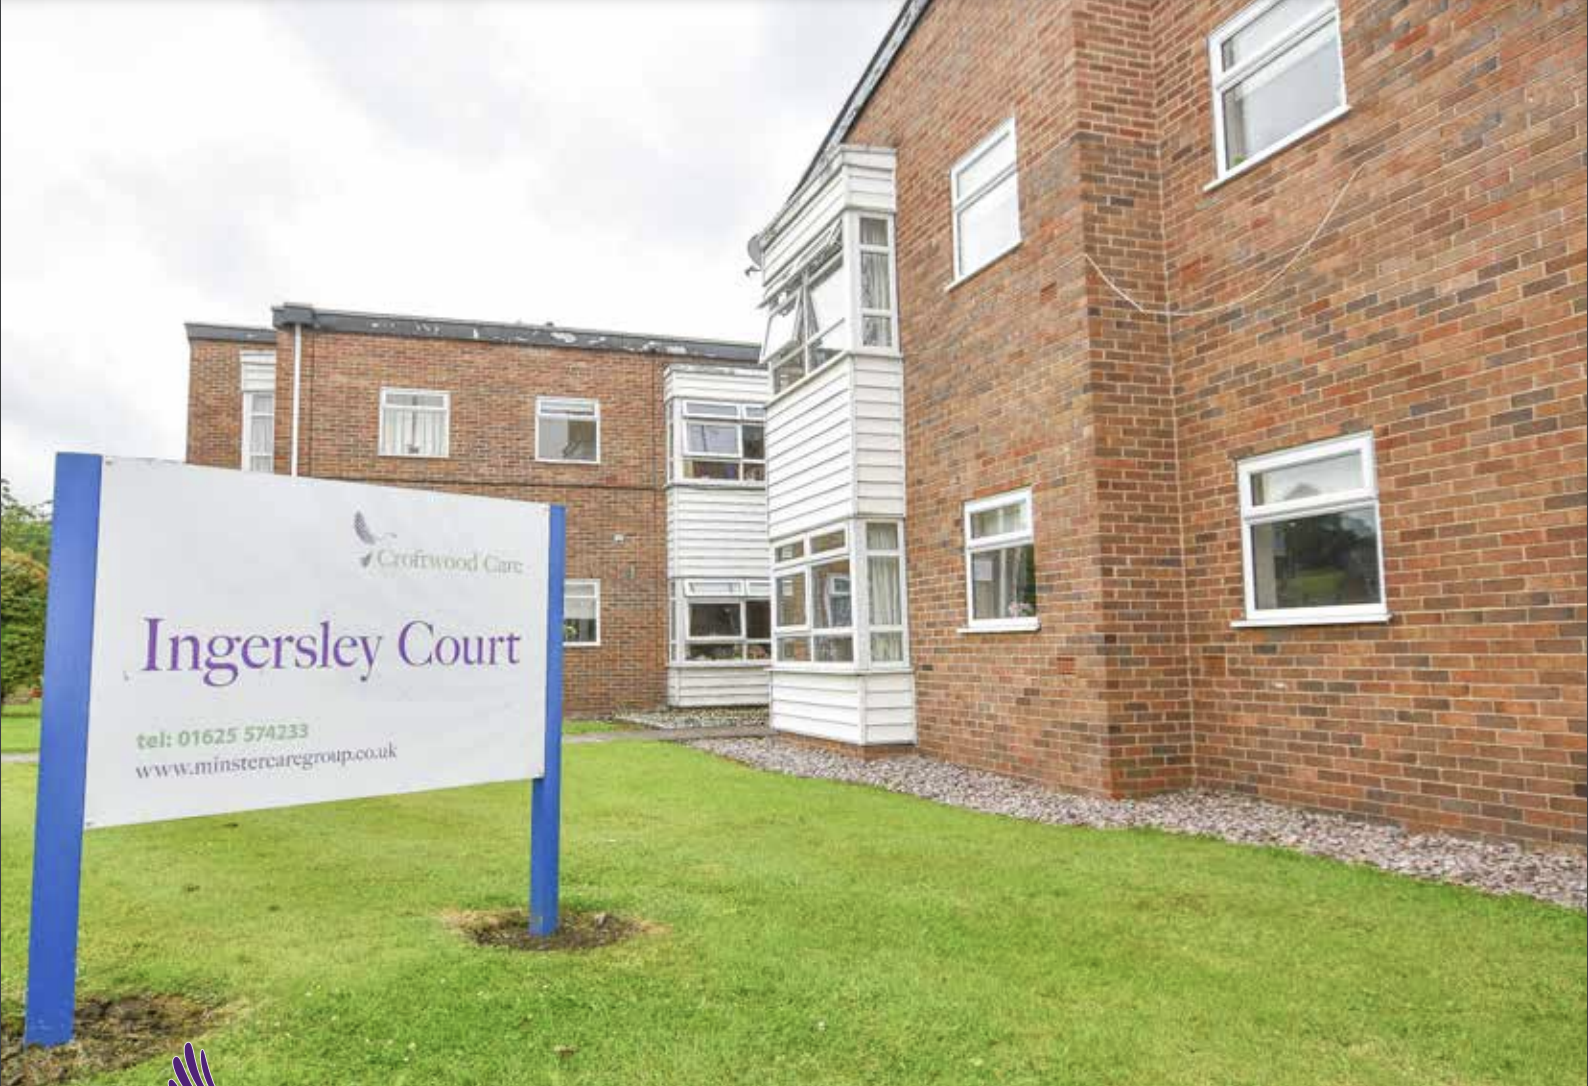 Minster Care Group - Ingersley Court care home 1